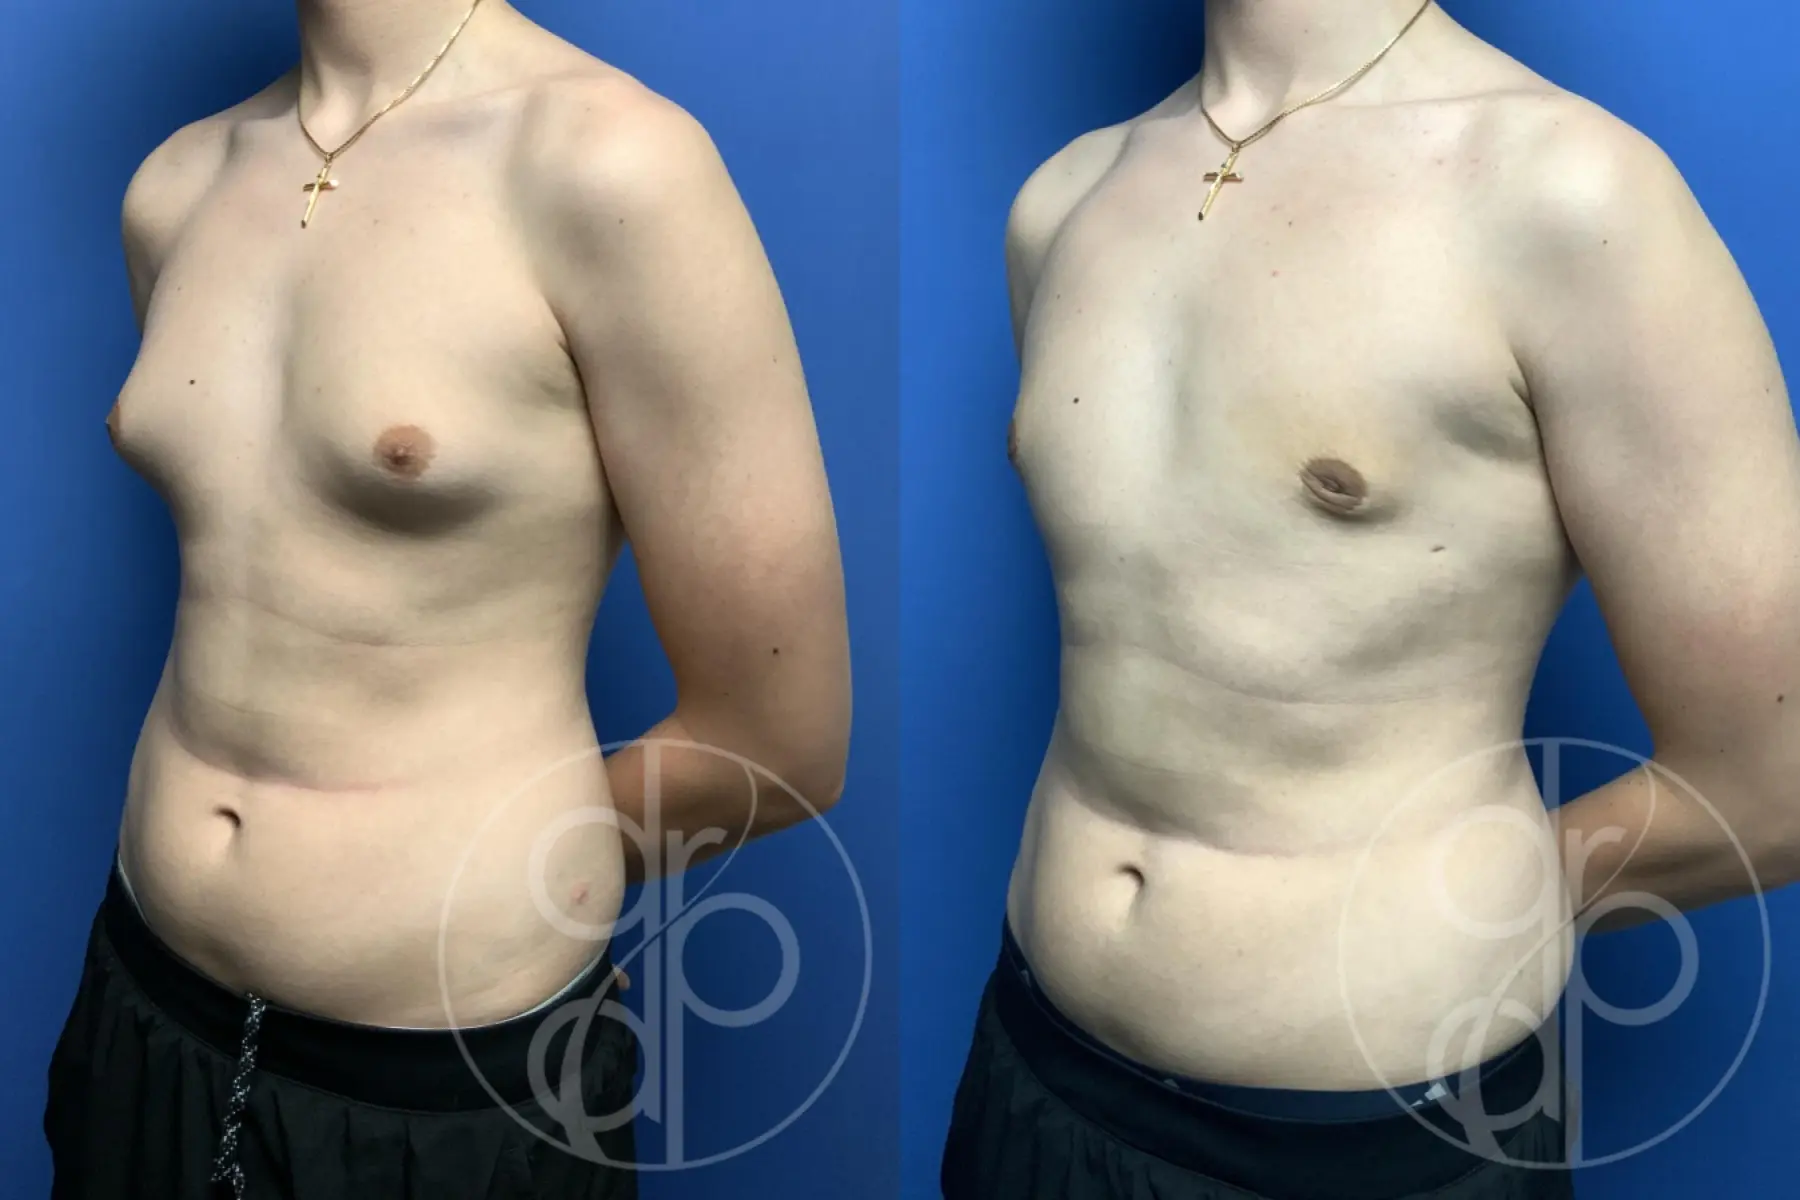 gynecomastia before and after result - Before and After 3